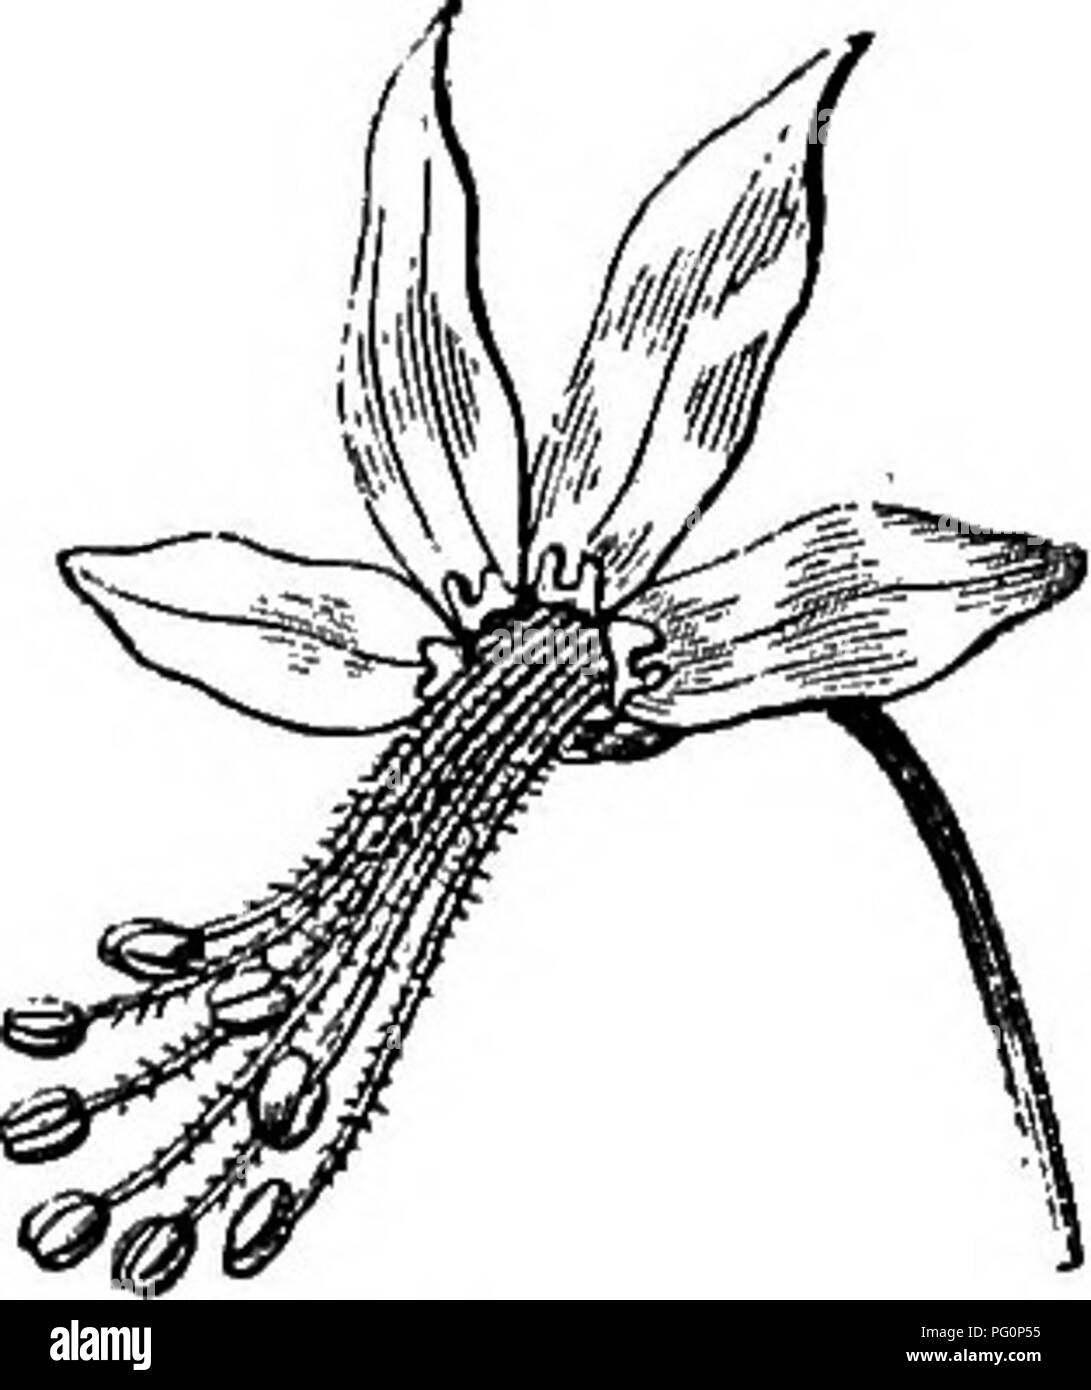 . The natural history of plants. Botany. Fig. 390. Longitudinal section of seed. Fig. 385. Flower. Fig. 389. Seed (f). flowers are also observed, having five sepals, with three or four ungui- culate petals, five to eight declinate stamens, and a unilateral disk; but in each ovary cell is inserted, towards the middle of the internal angle, two ovules primitively ascendent, with the raphe internal, whilst when full grown, only one remains so, the other becoming descendent, with the raphe outwards. The fruit (fig. 387-388) is a vescicular capsule, recalling that of Cardiospermump^la.os(i three ce Stock Photo